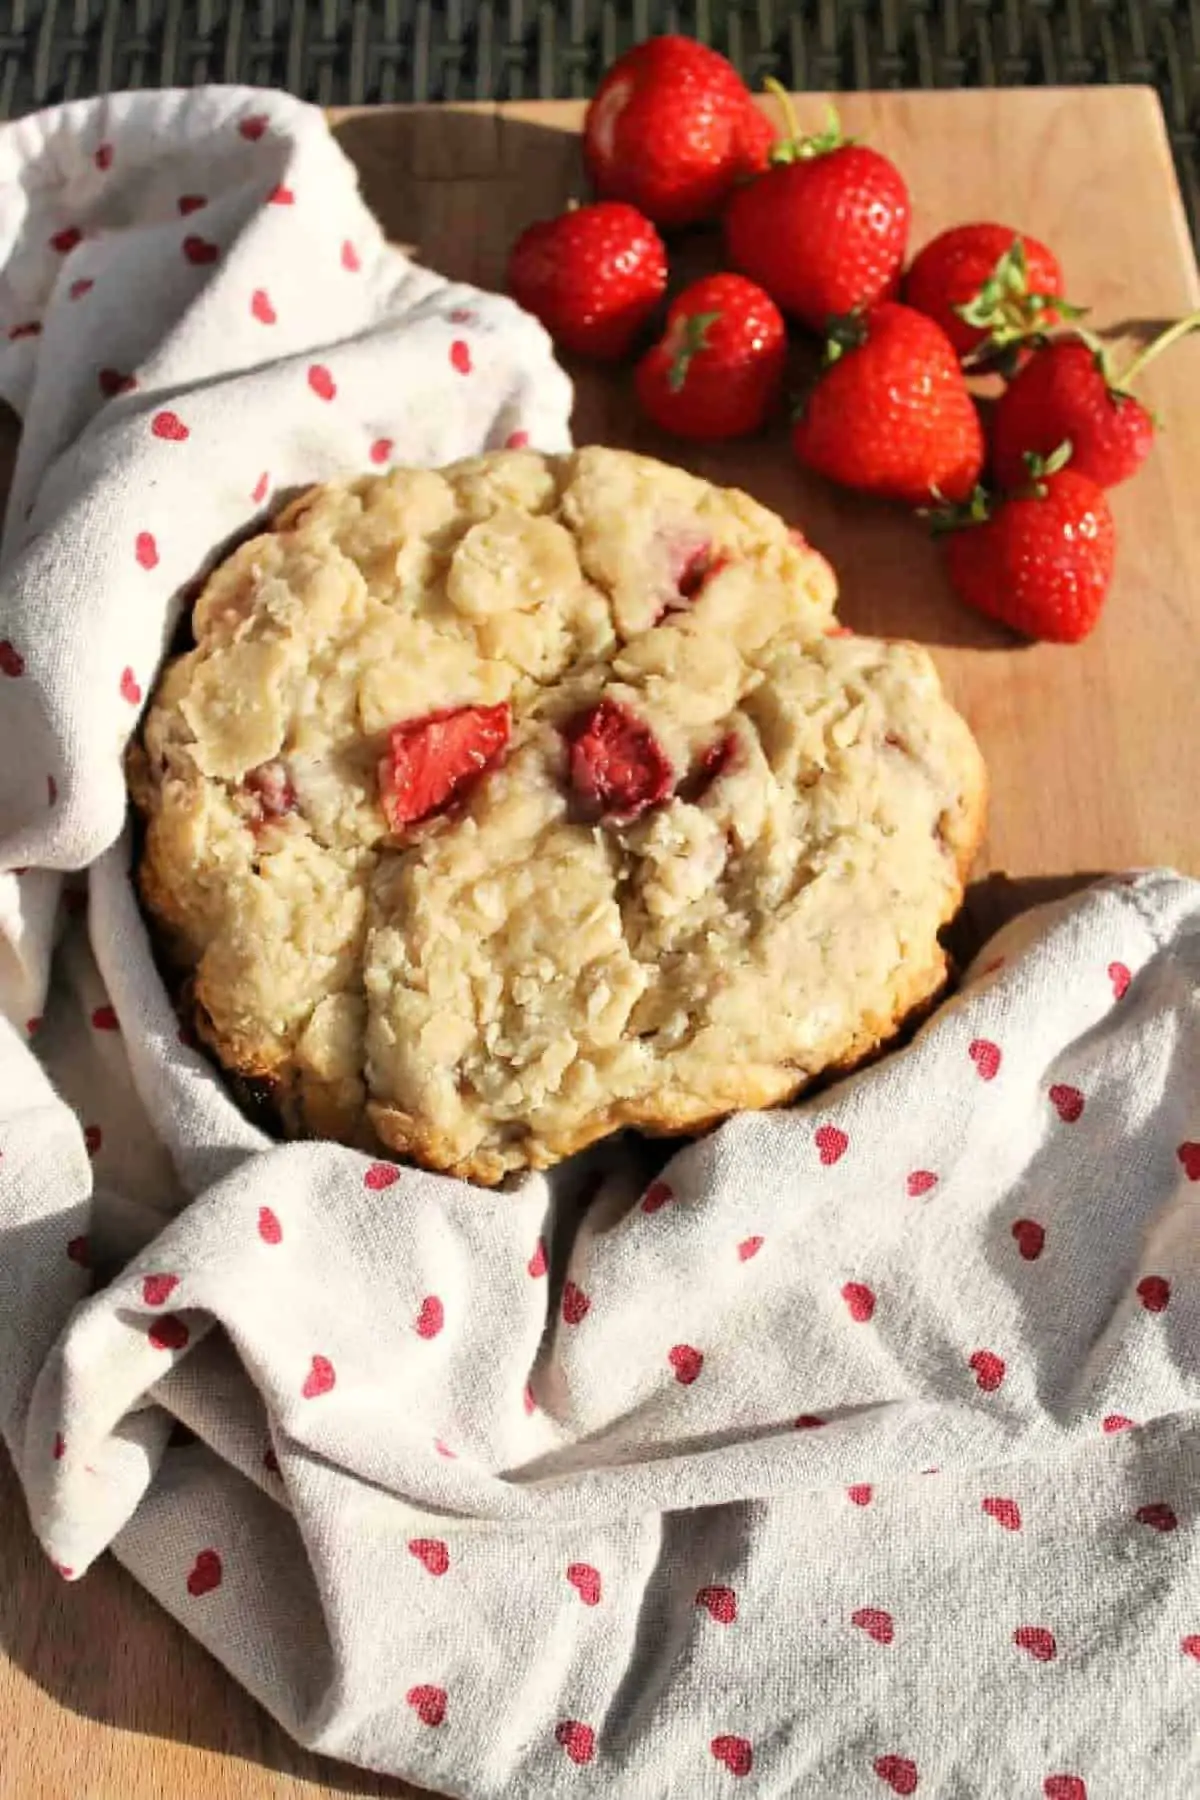 Large scone with strawberries on a board on a tea towel, with strawberries to the side.